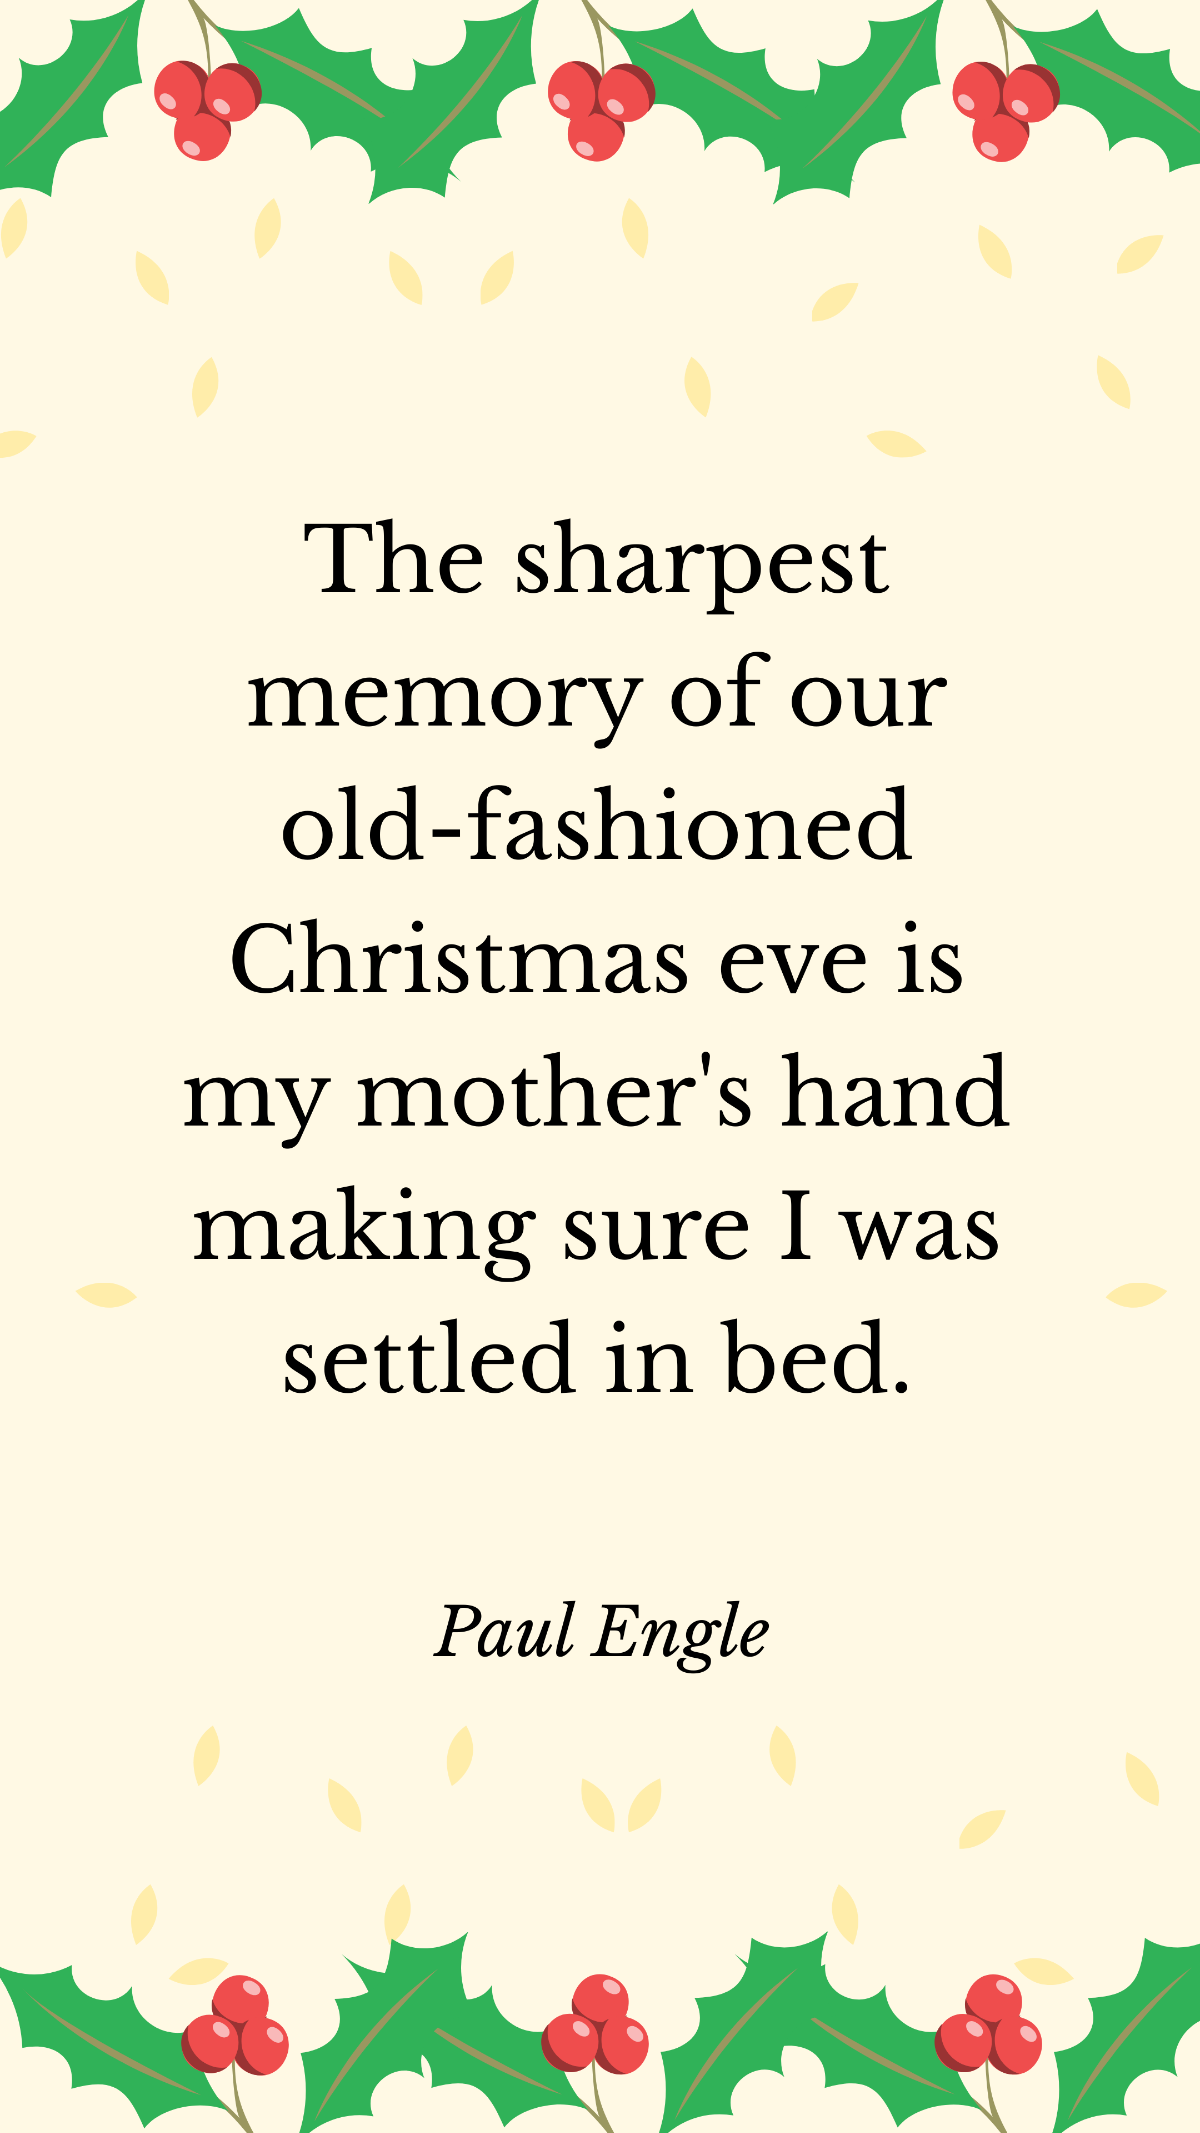 Paul Engle - The sharpest memory of our old-fashioned Christmas eve is my mother's hand making sure I was settled in bed. Template